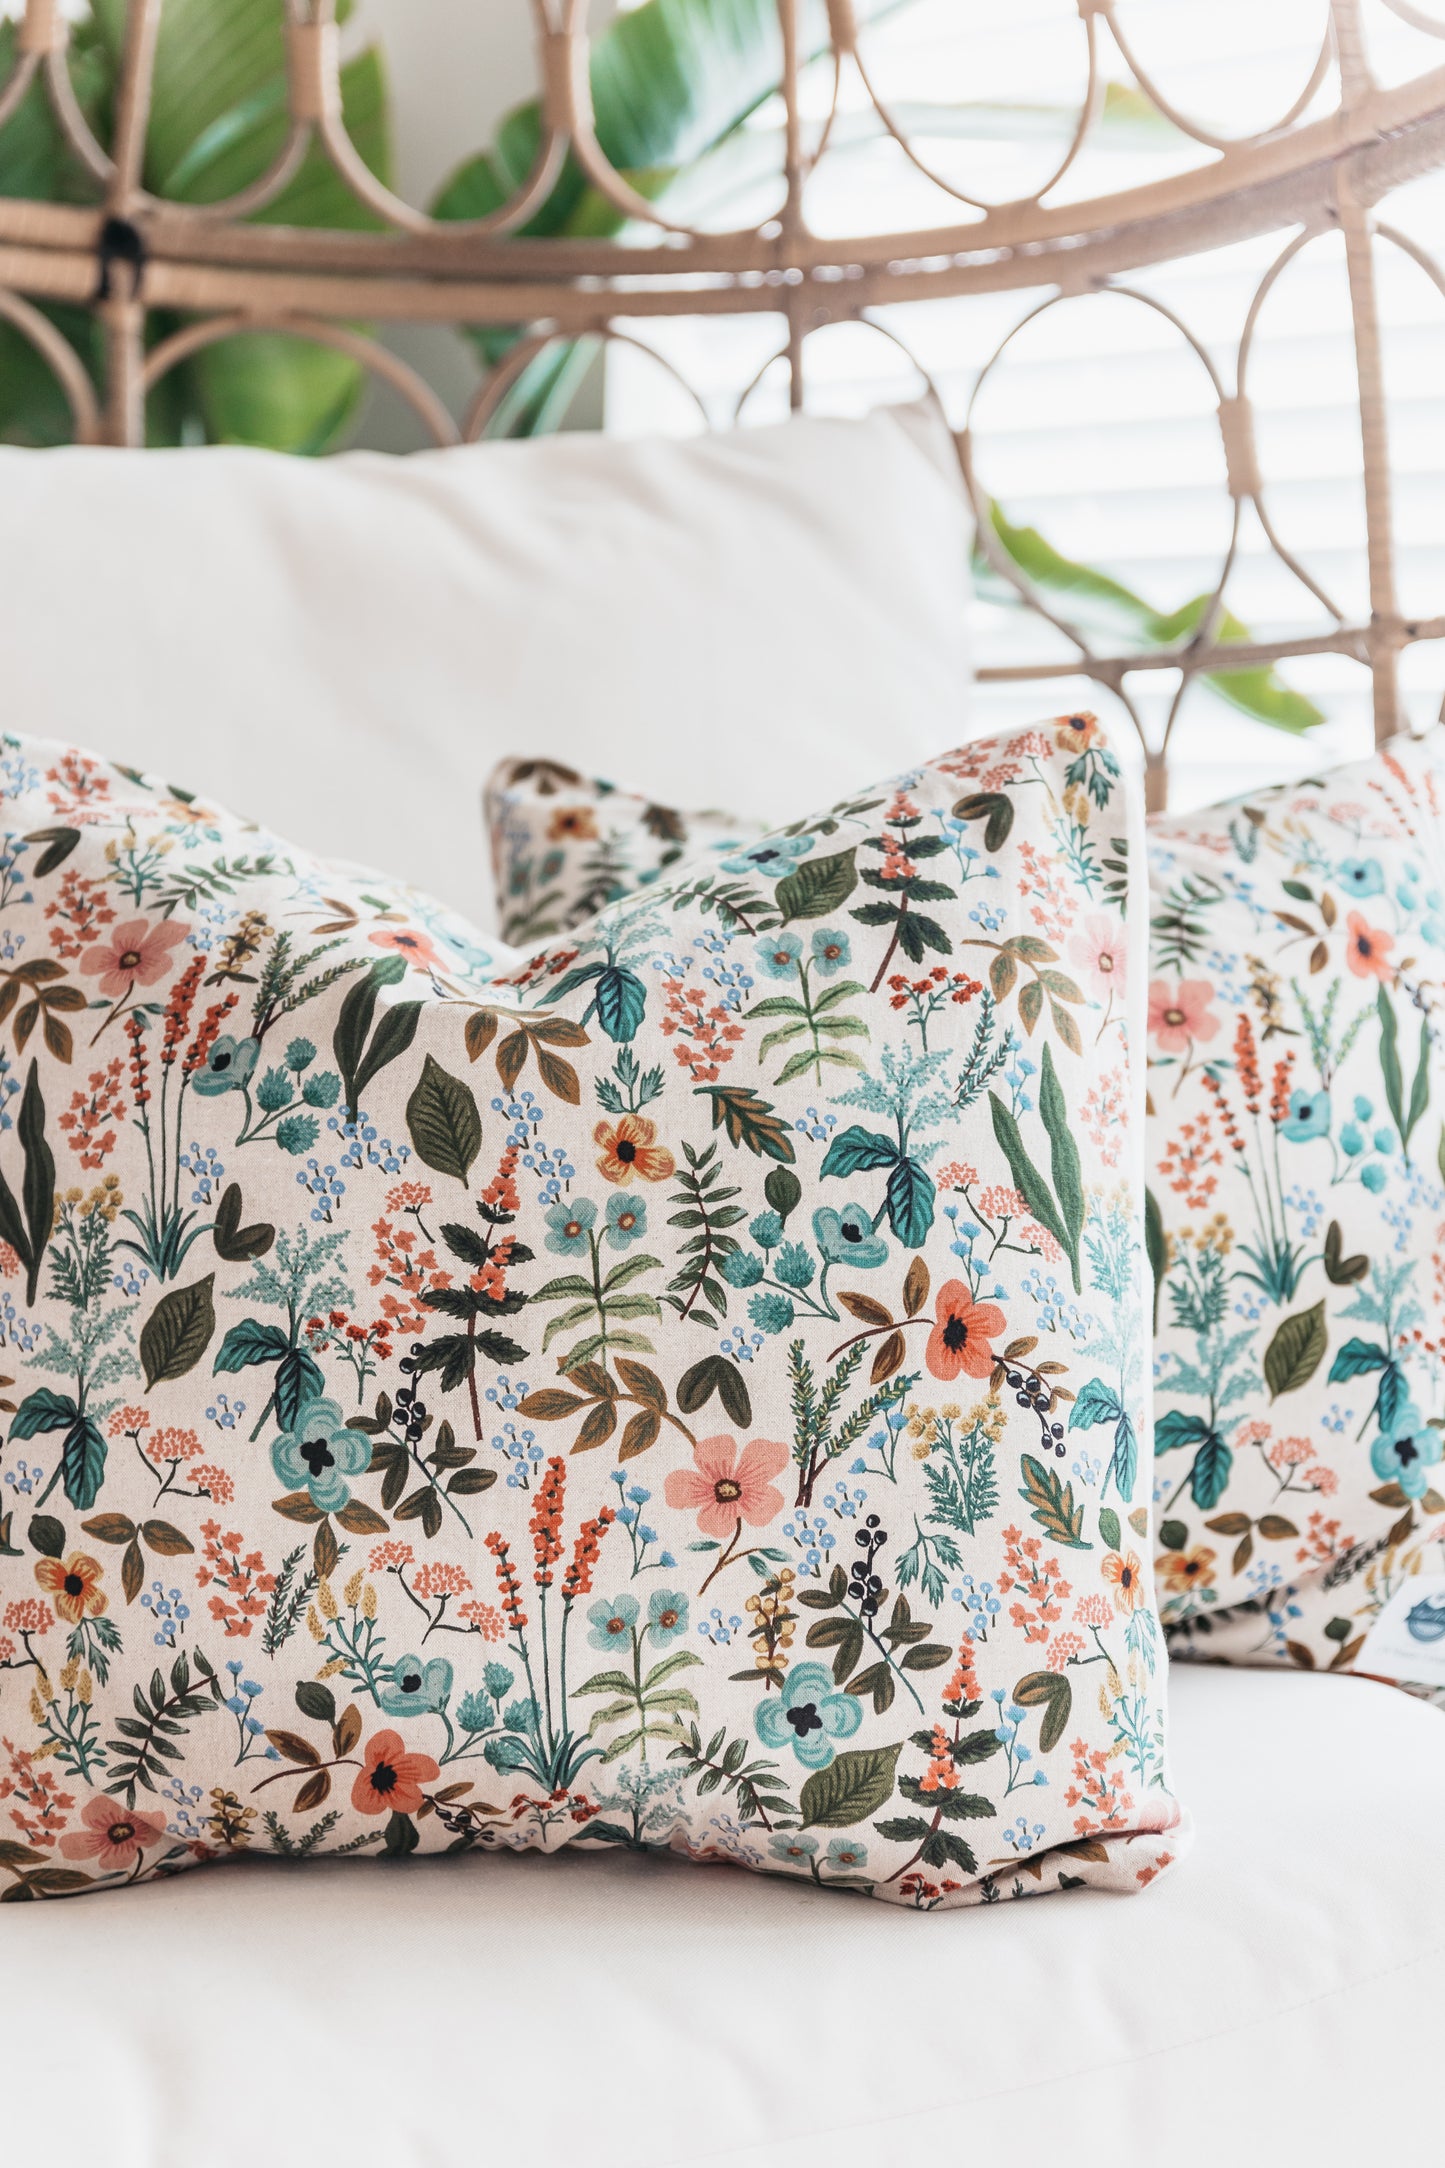 Pillow: Floral Front I (floral fabric front)